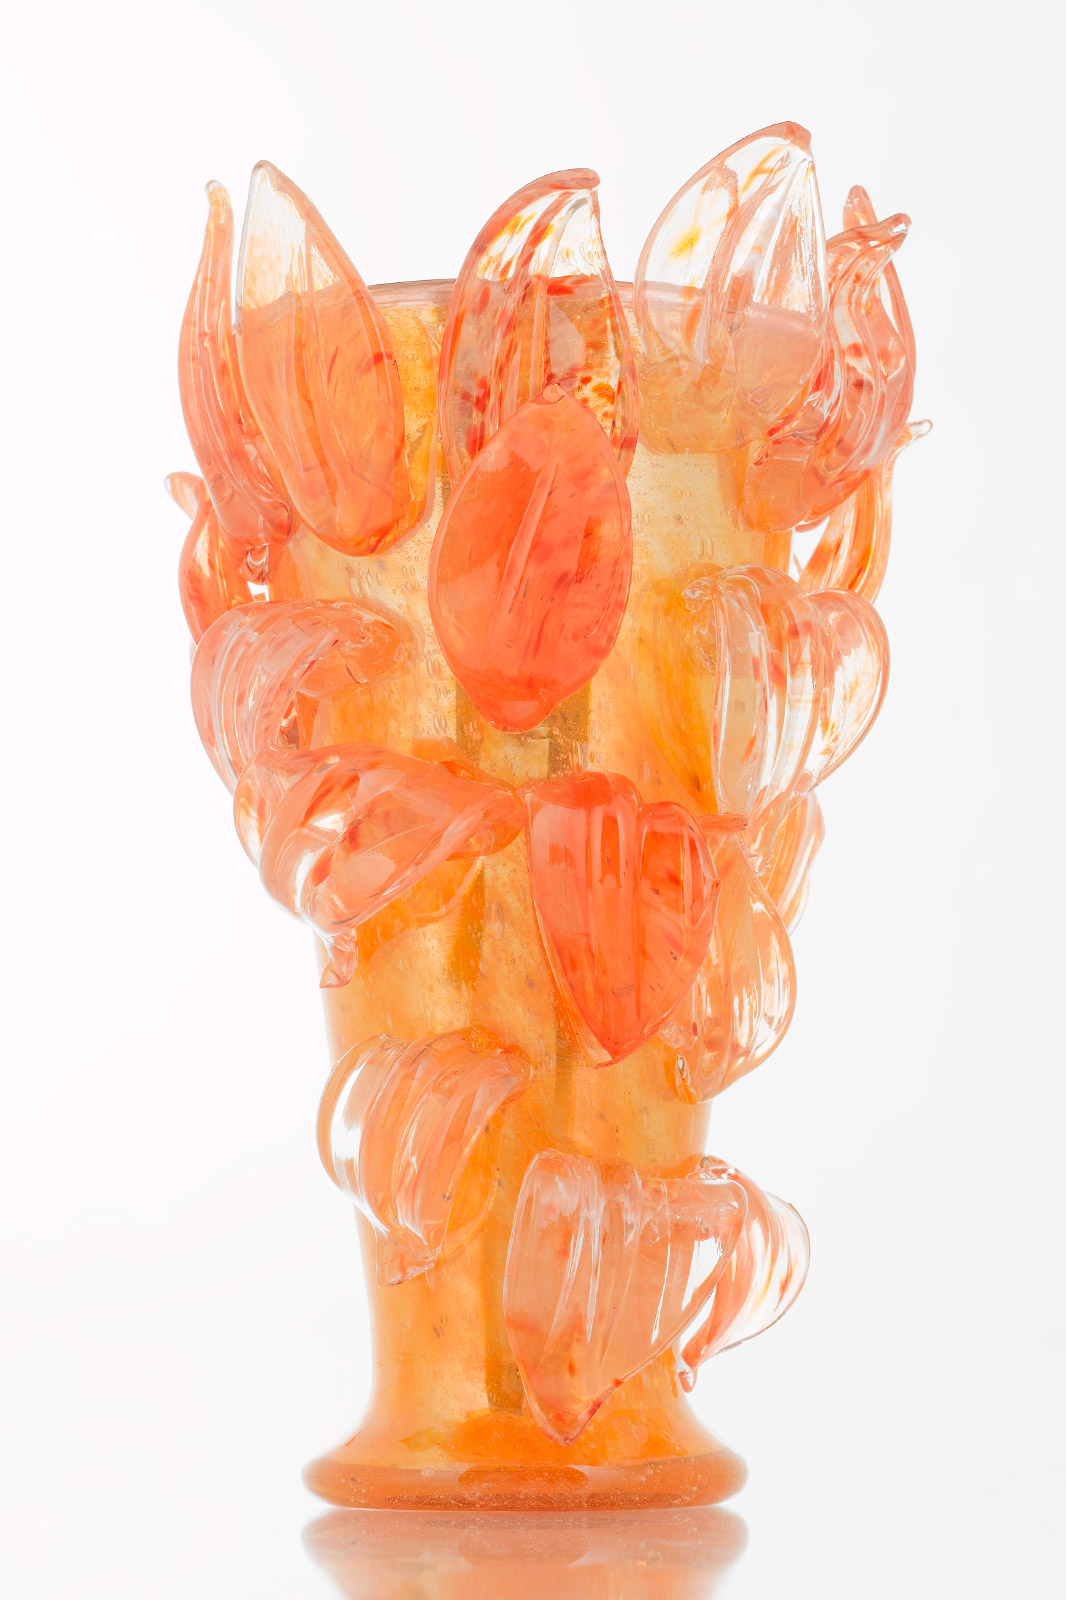 Silvered Tangerine Piccolo Venetian with Abundant Leaves, 1995 by Dale Chihuly